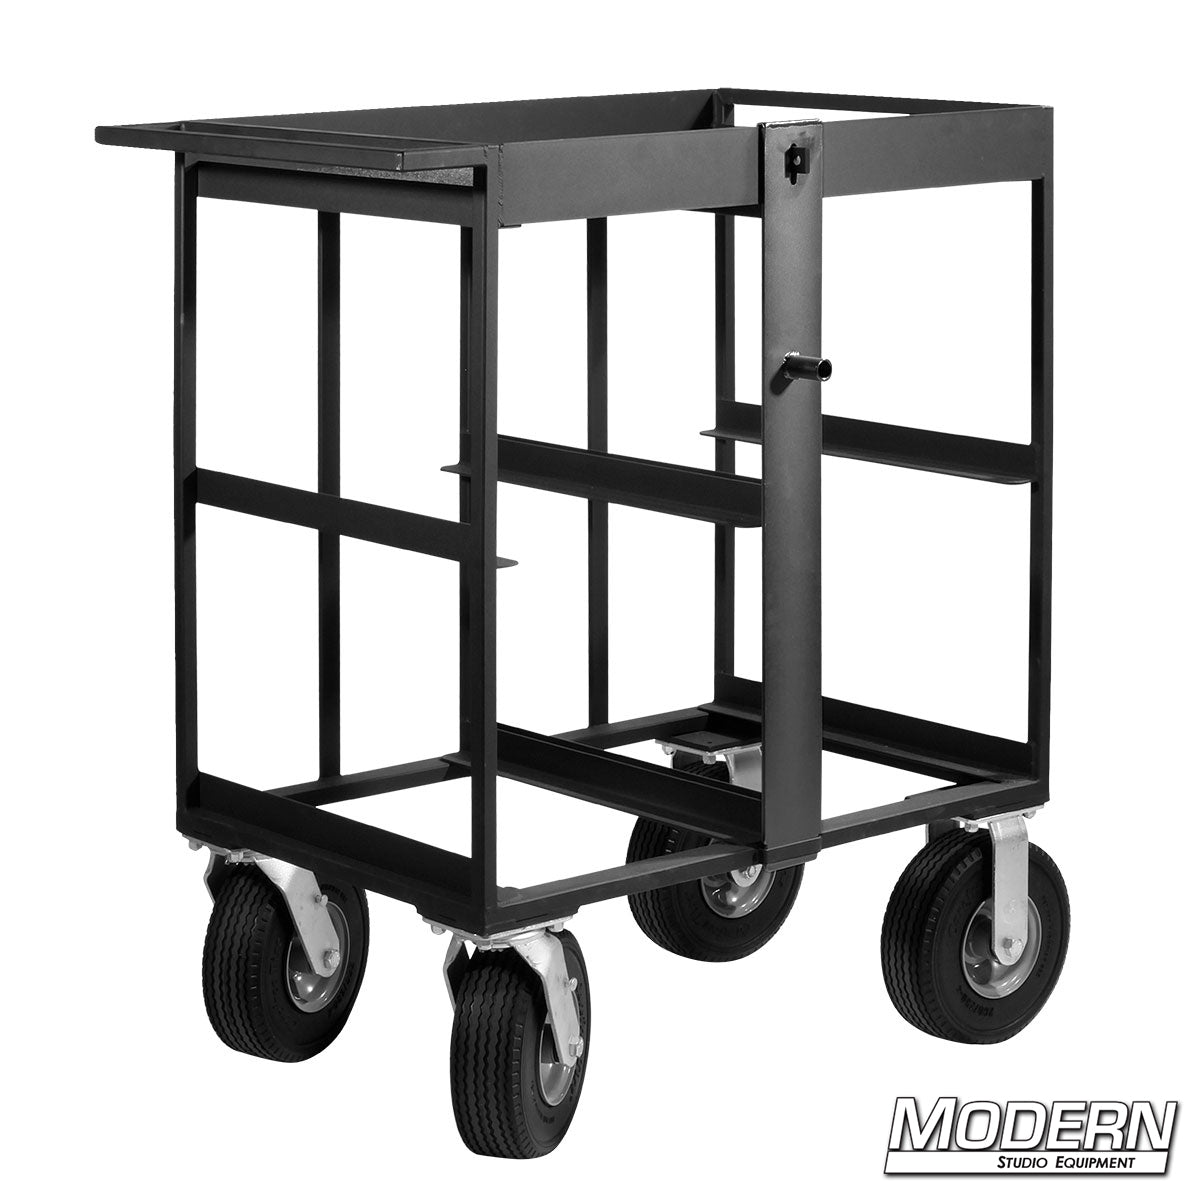 4 Place Milk Crate Cart Complete with Locking Bar